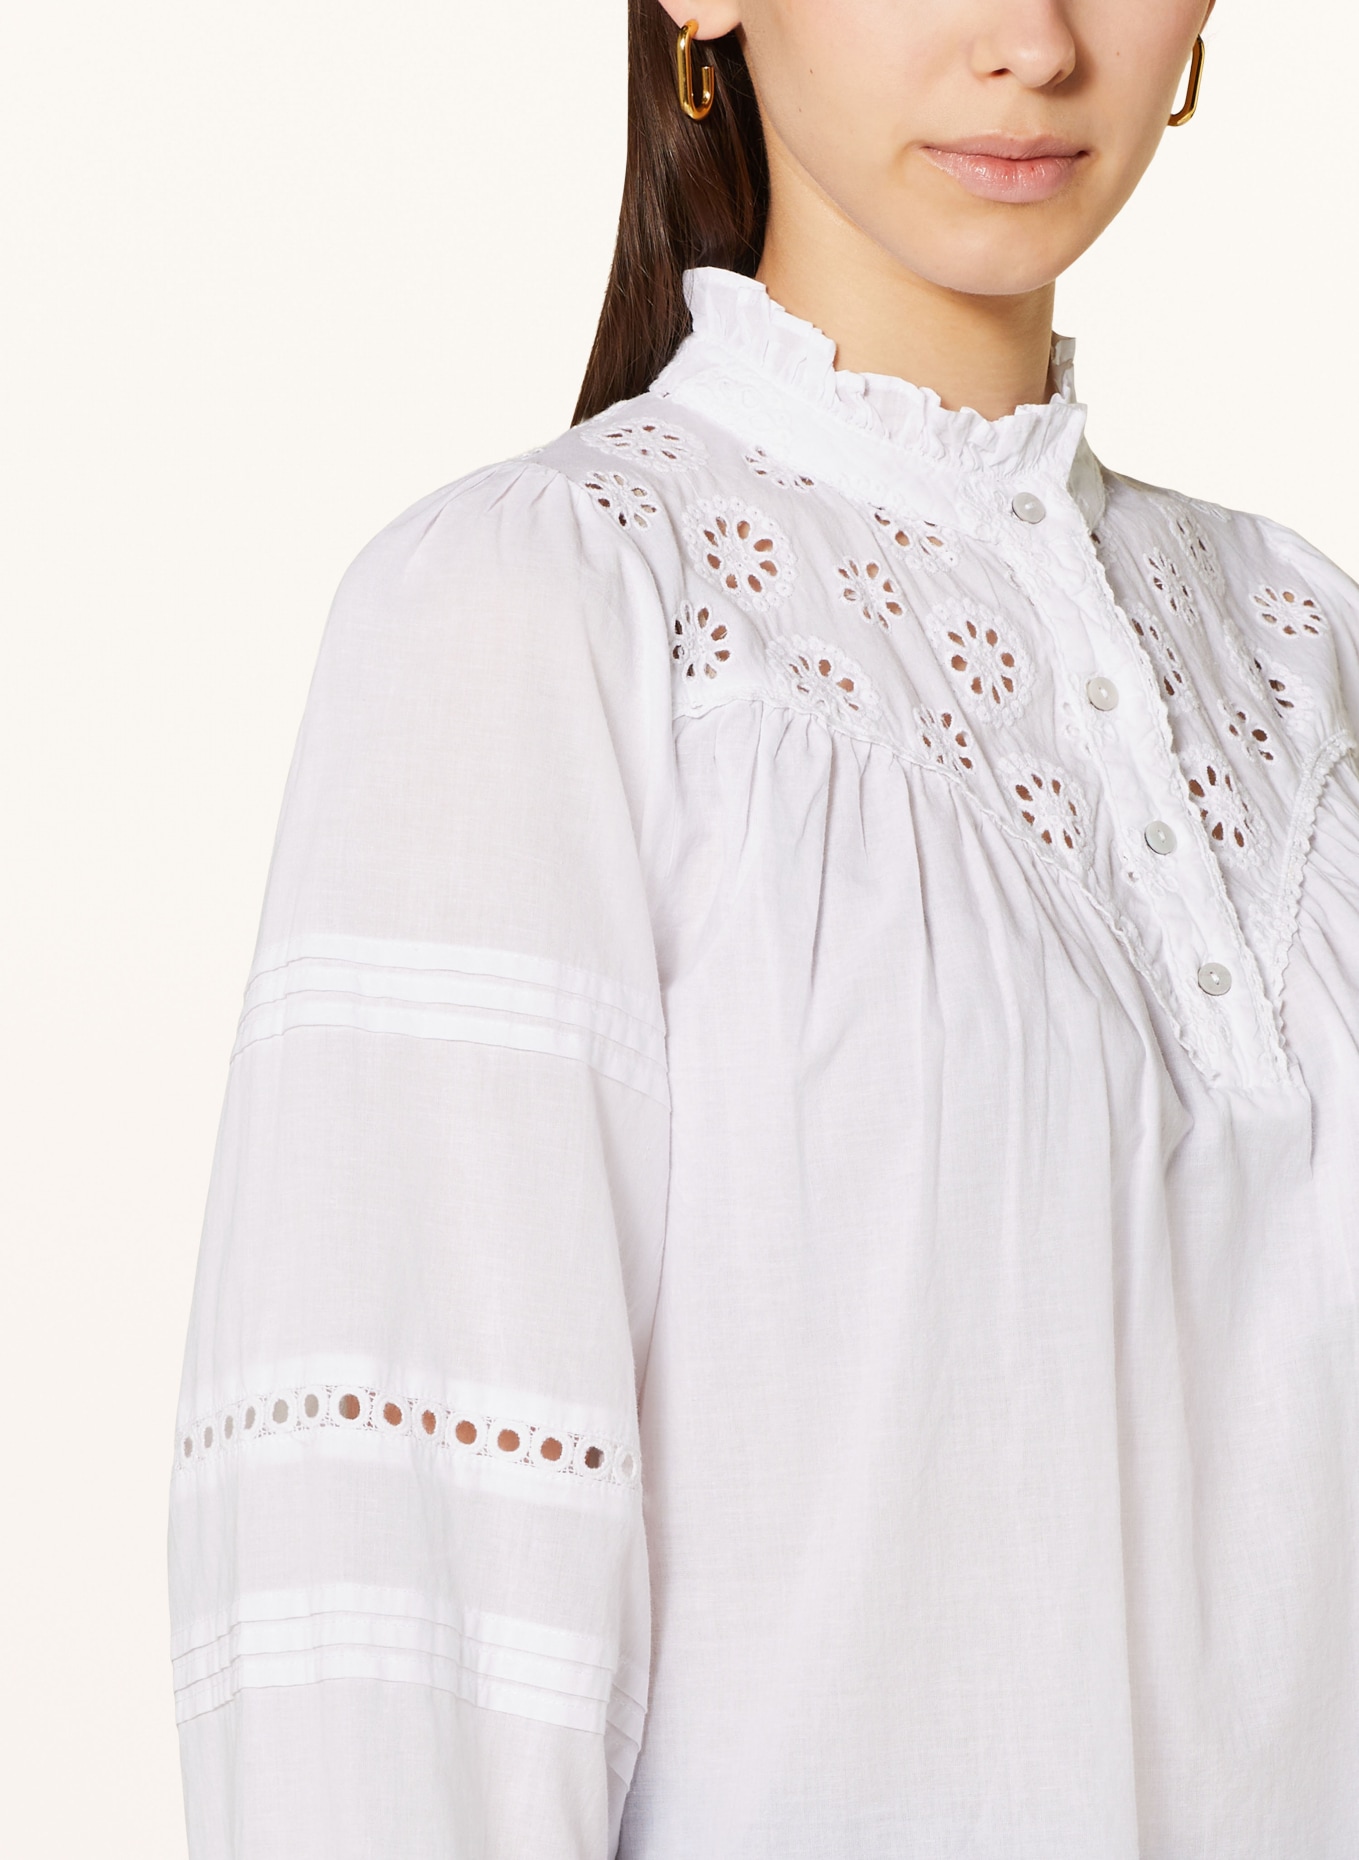 NEO NOIR Shirt blouse EMILY with broderie anglaise, Color: WHITE (Image 4)